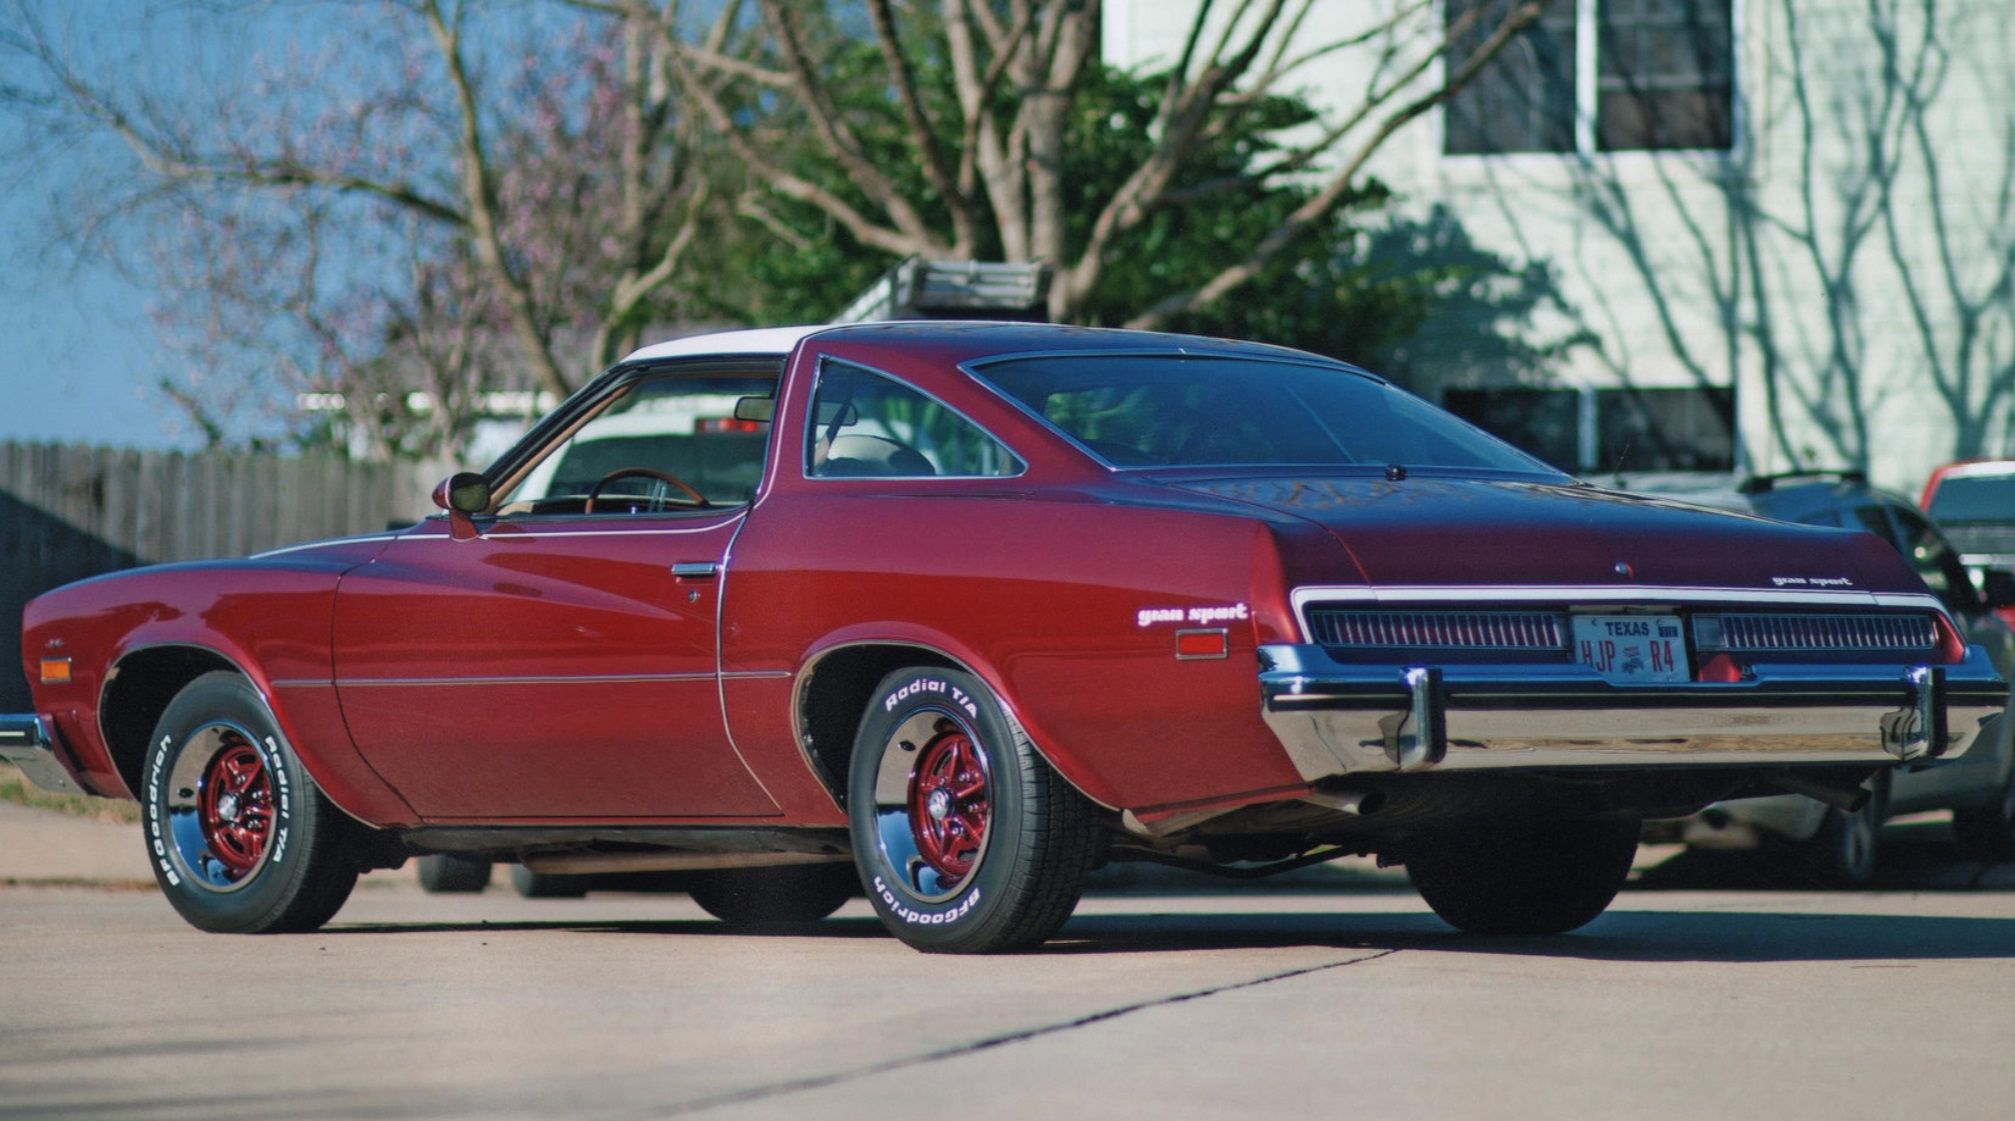 The 1974 Buick Gran Sport on a parking lot.